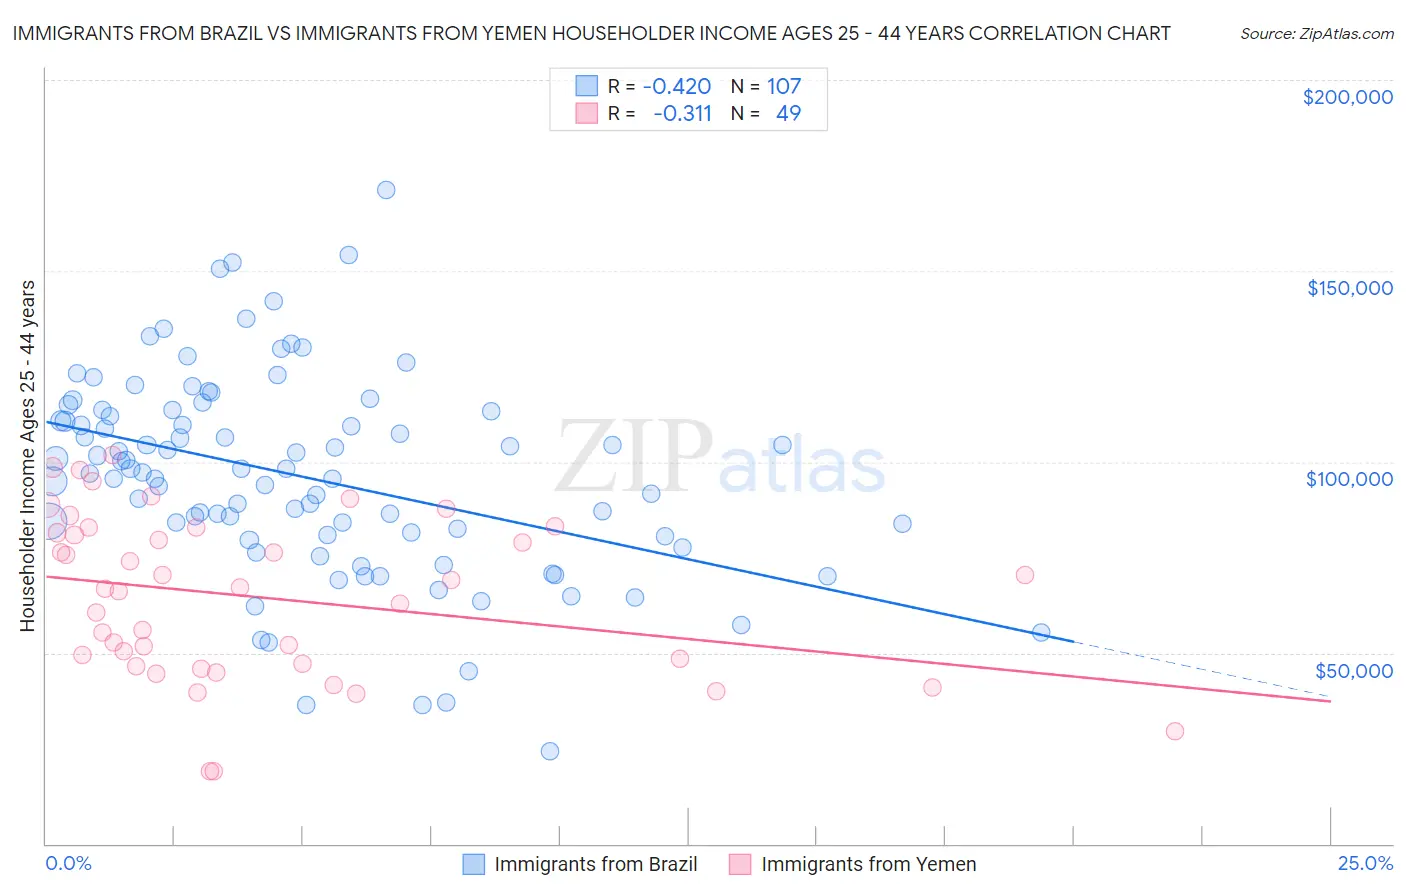 Immigrants from Brazil vs Immigrants from Yemen Householder Income Ages 25 - 44 years